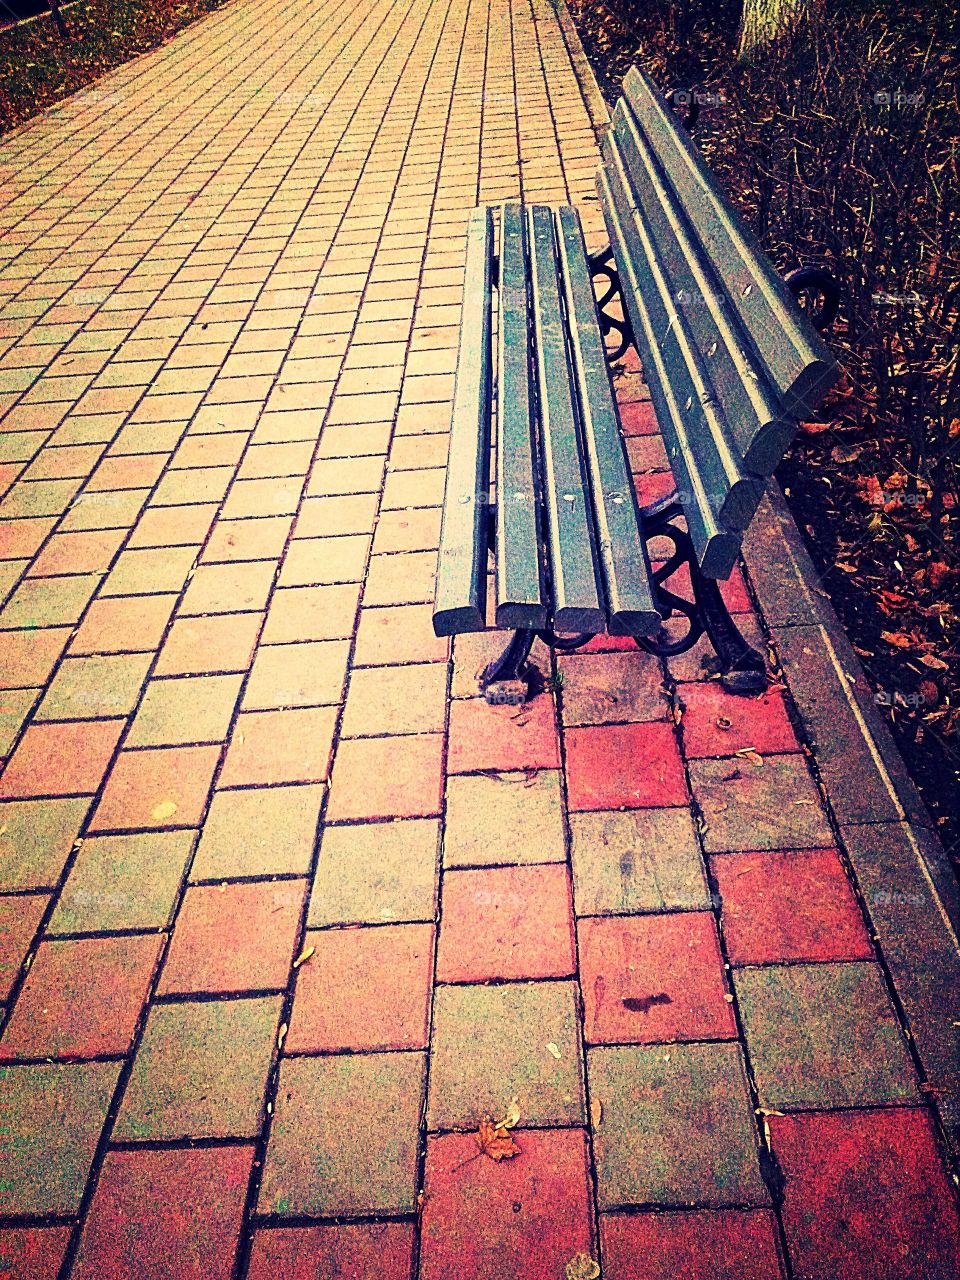 public bench on the pavement